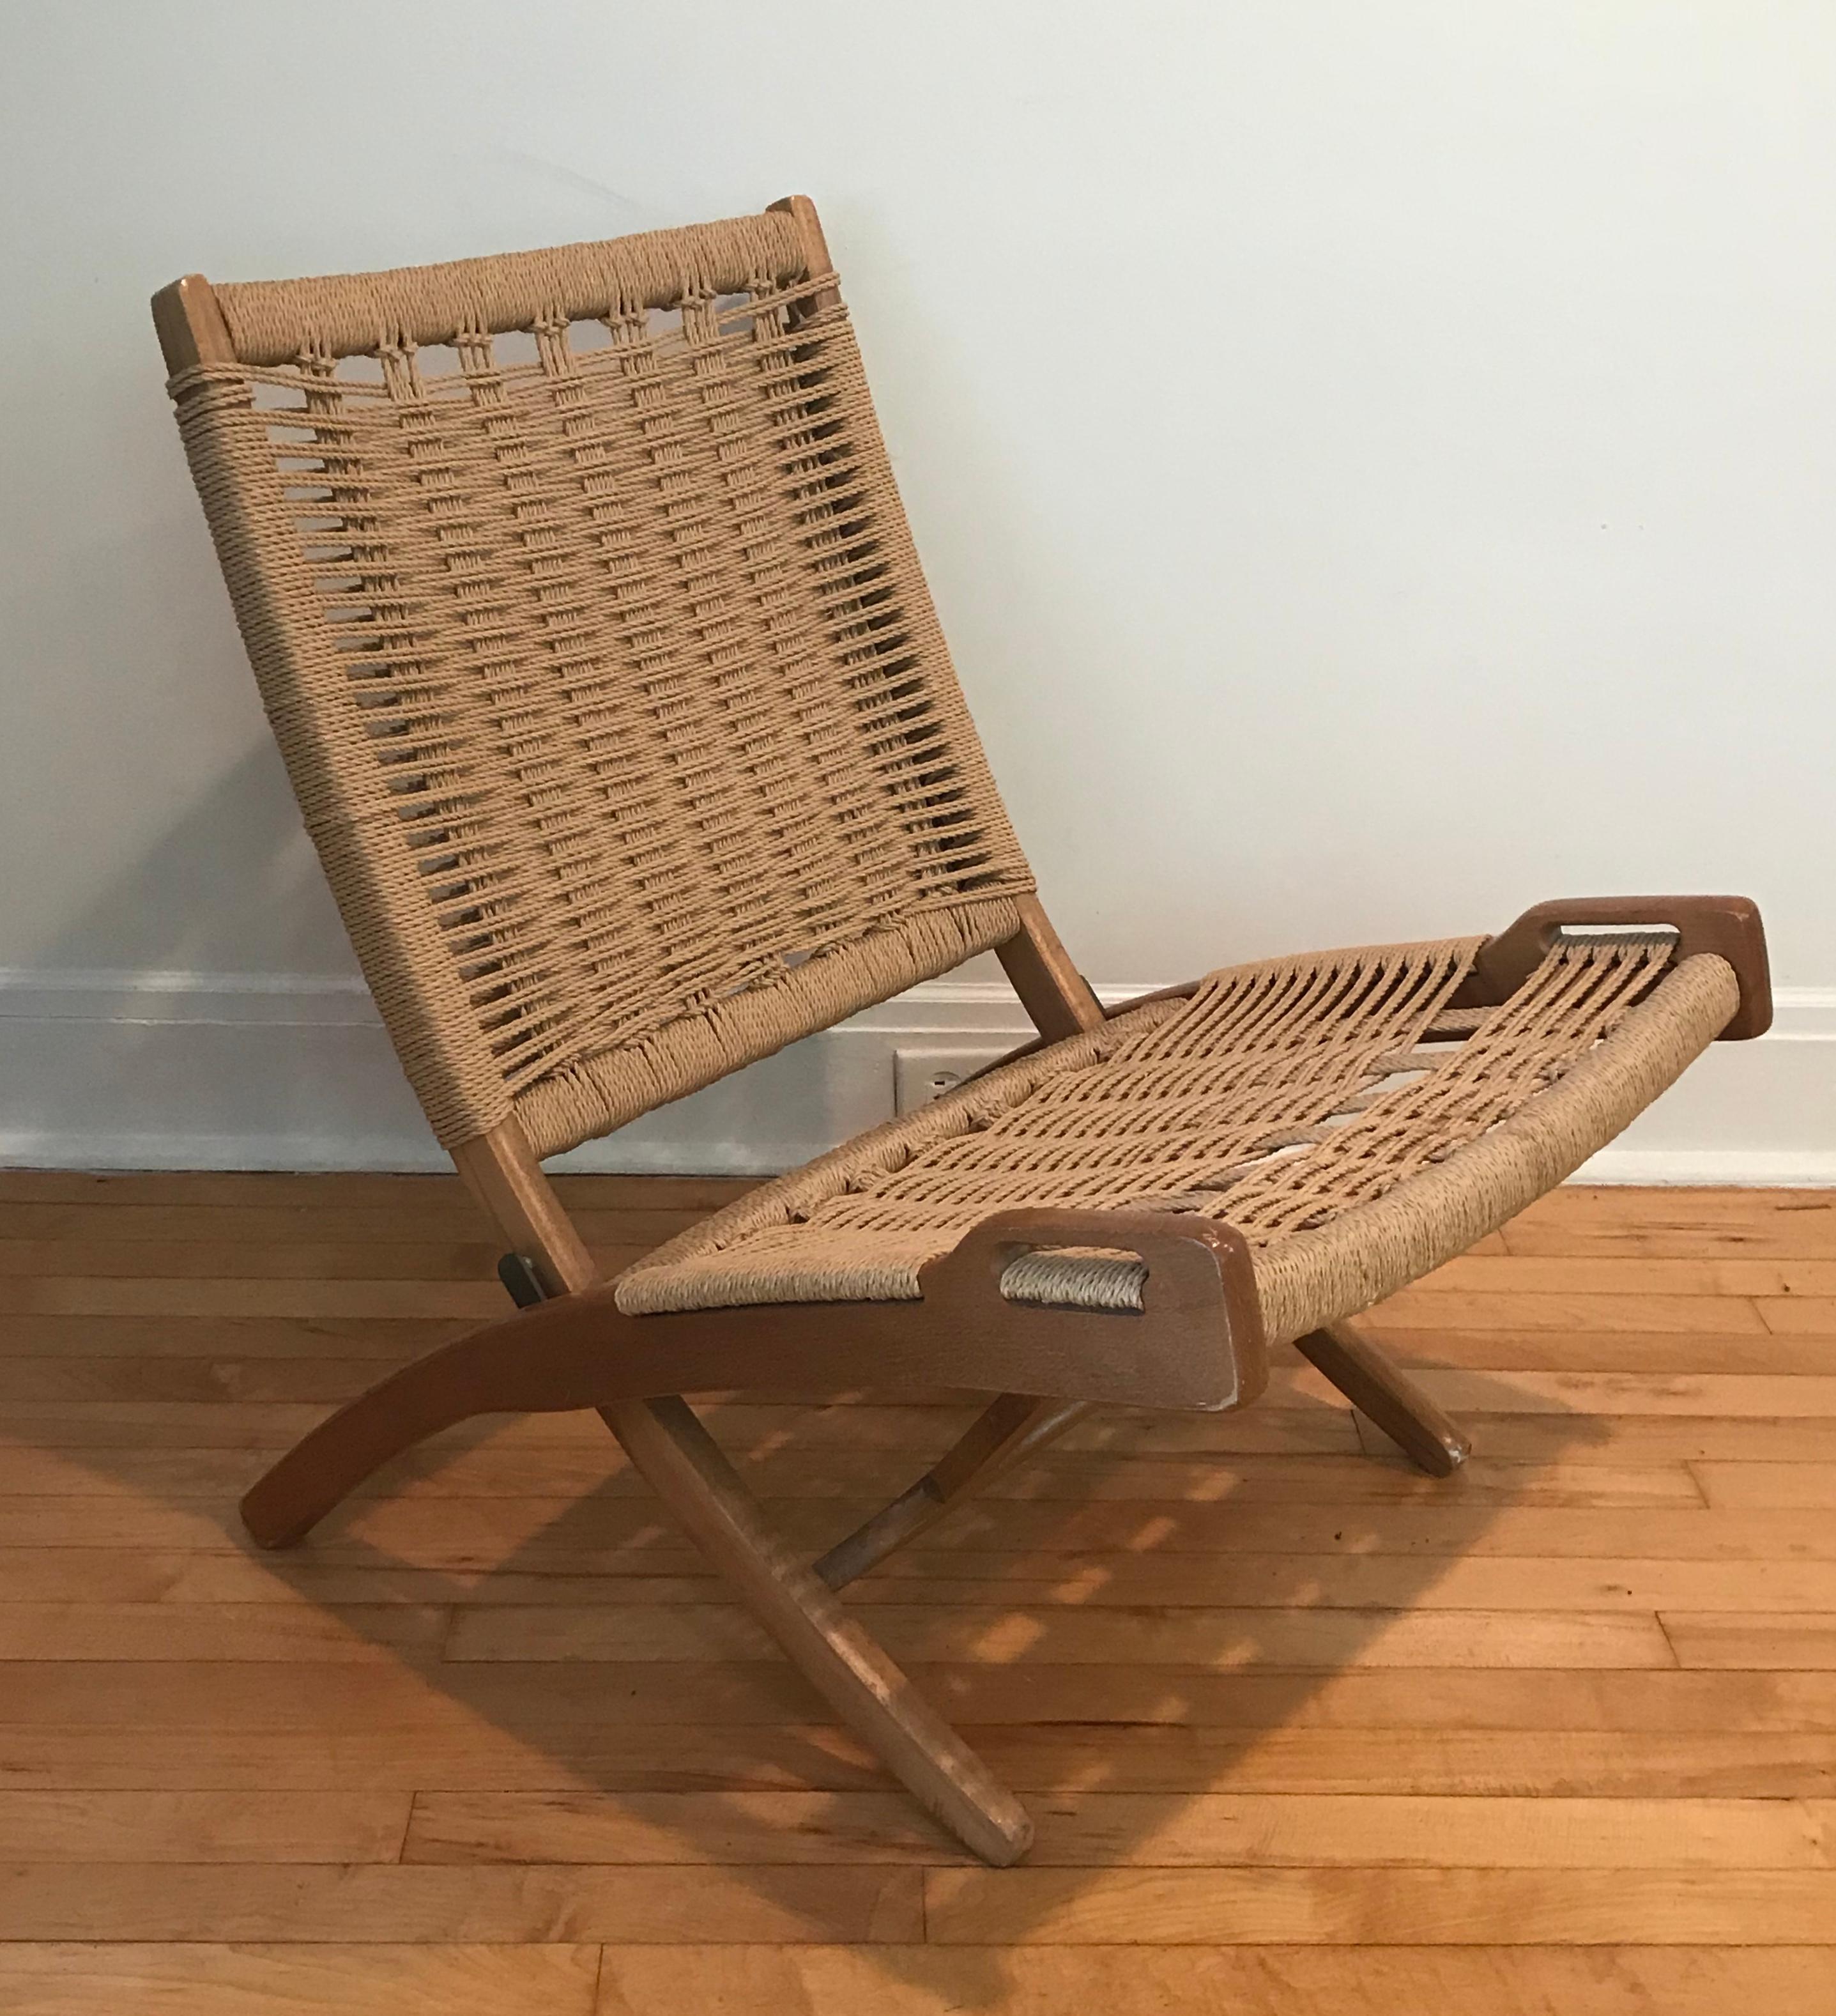 Folding lounge chair and ottoman made in Yugoslavia. Made of solid oak with woven seat. Very slight stain on edge of lounge seat, please see photo.